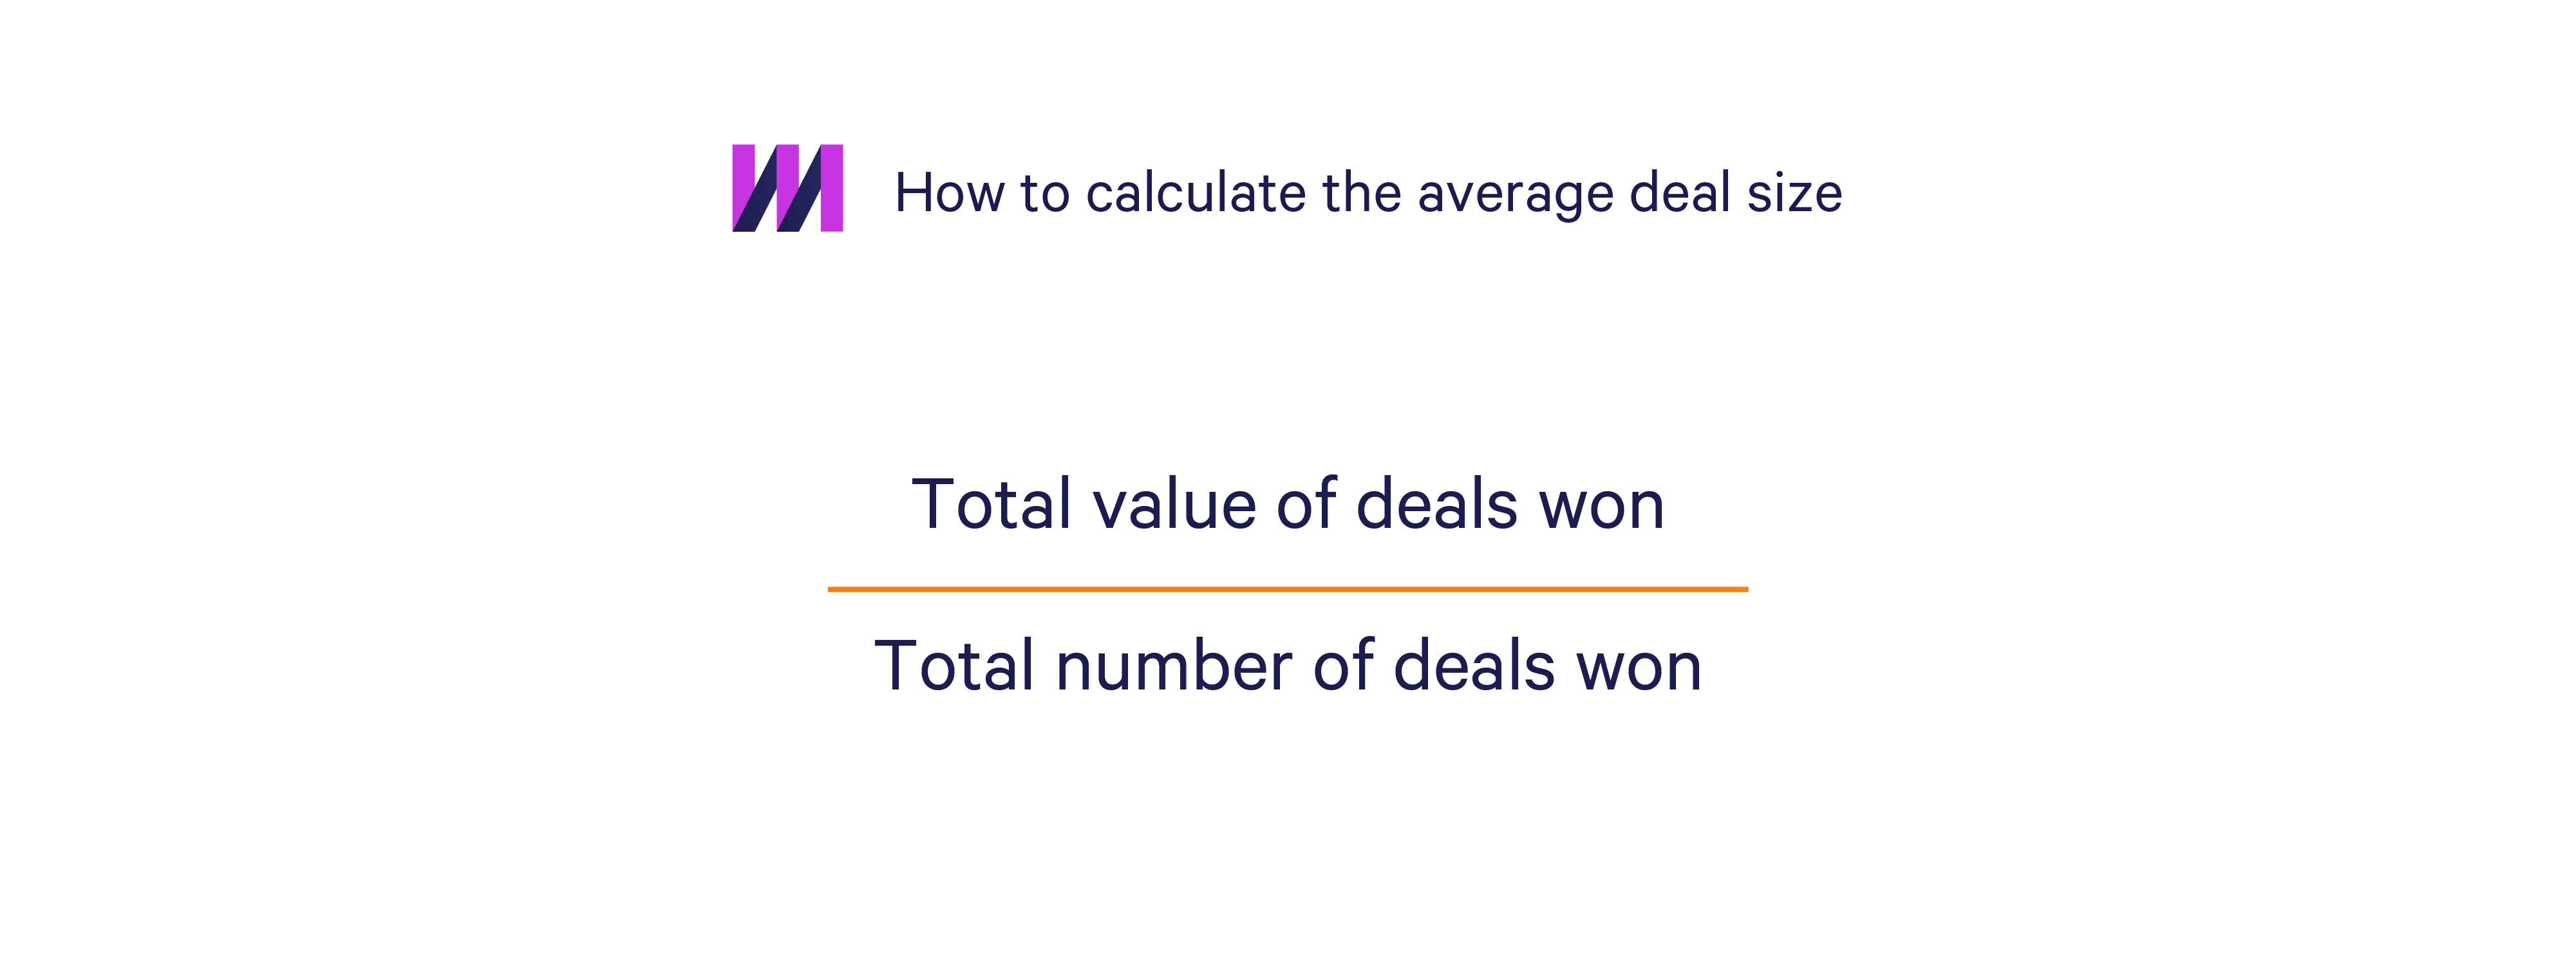 How to calculate the average deal size